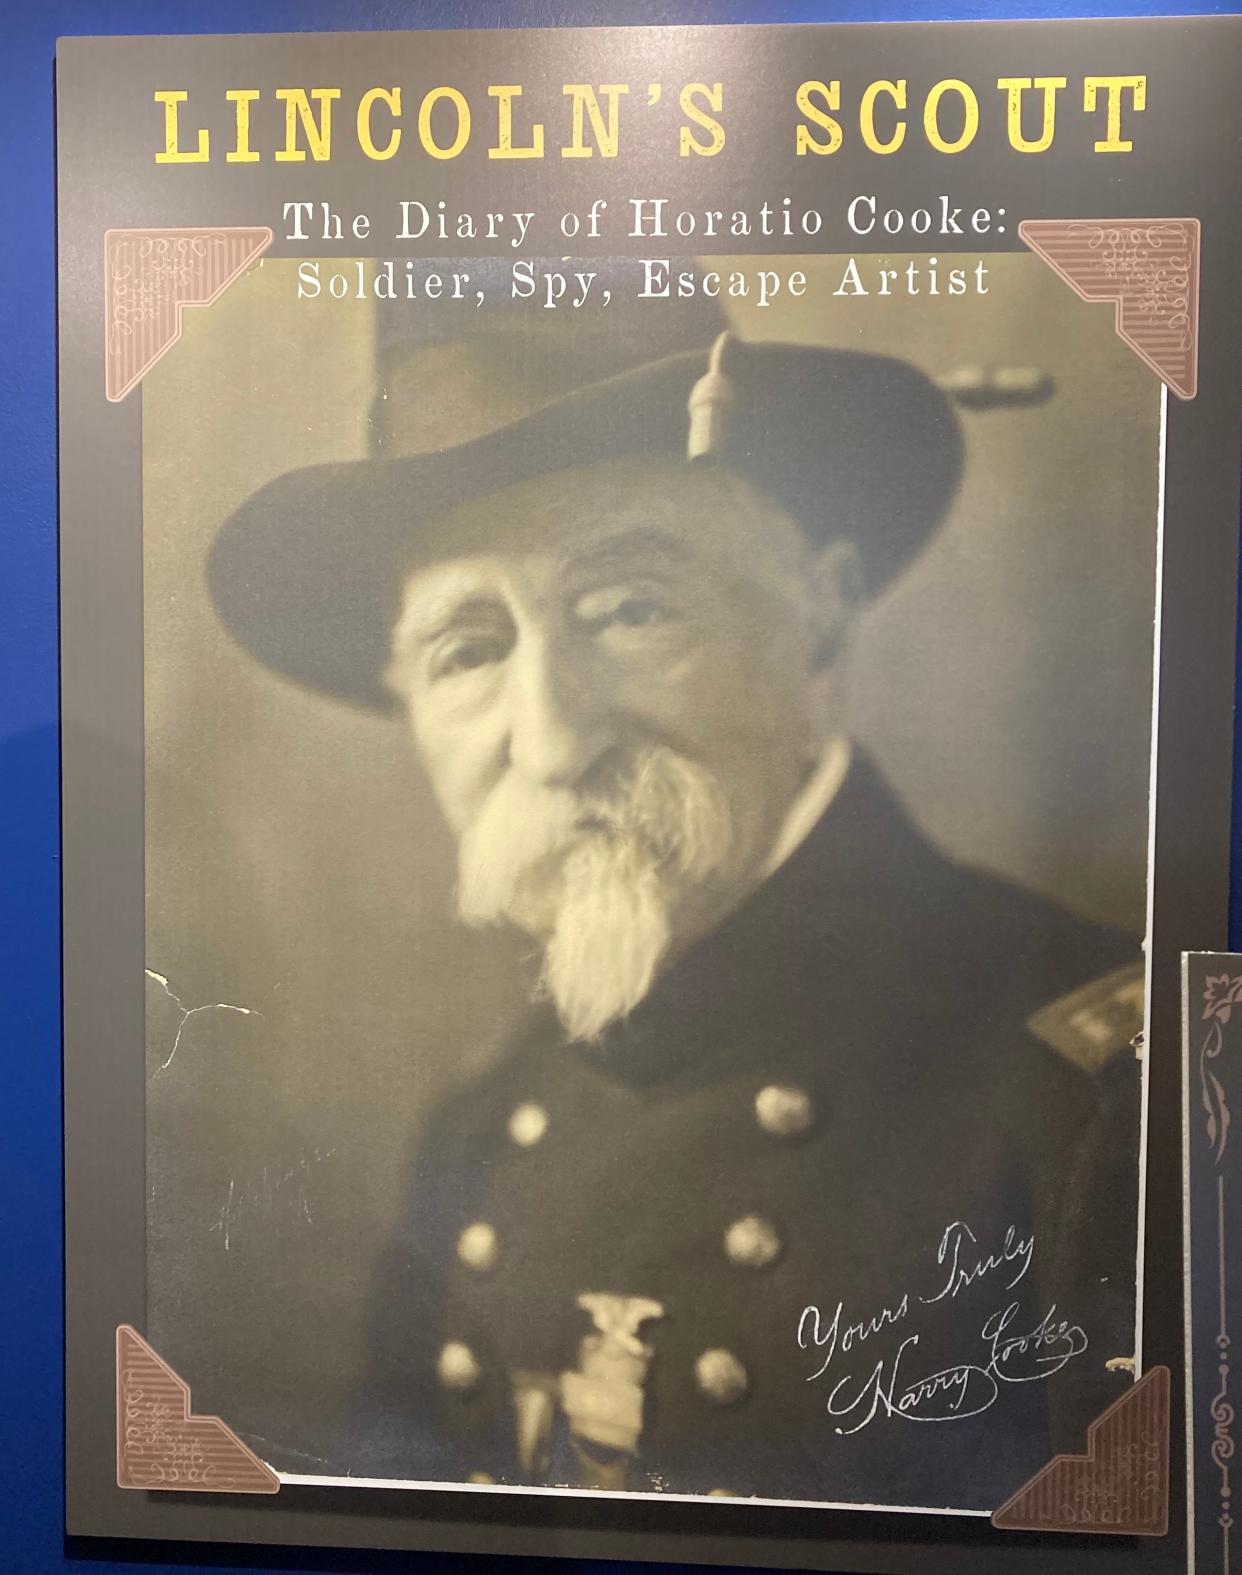 "Lincoln’s Scout: The Diary of Horatio Cooke: Soldier, Spy, Escape Artist," the latest exhibit at the La Quinta Museum, will be available for viewing through Dec. 31.